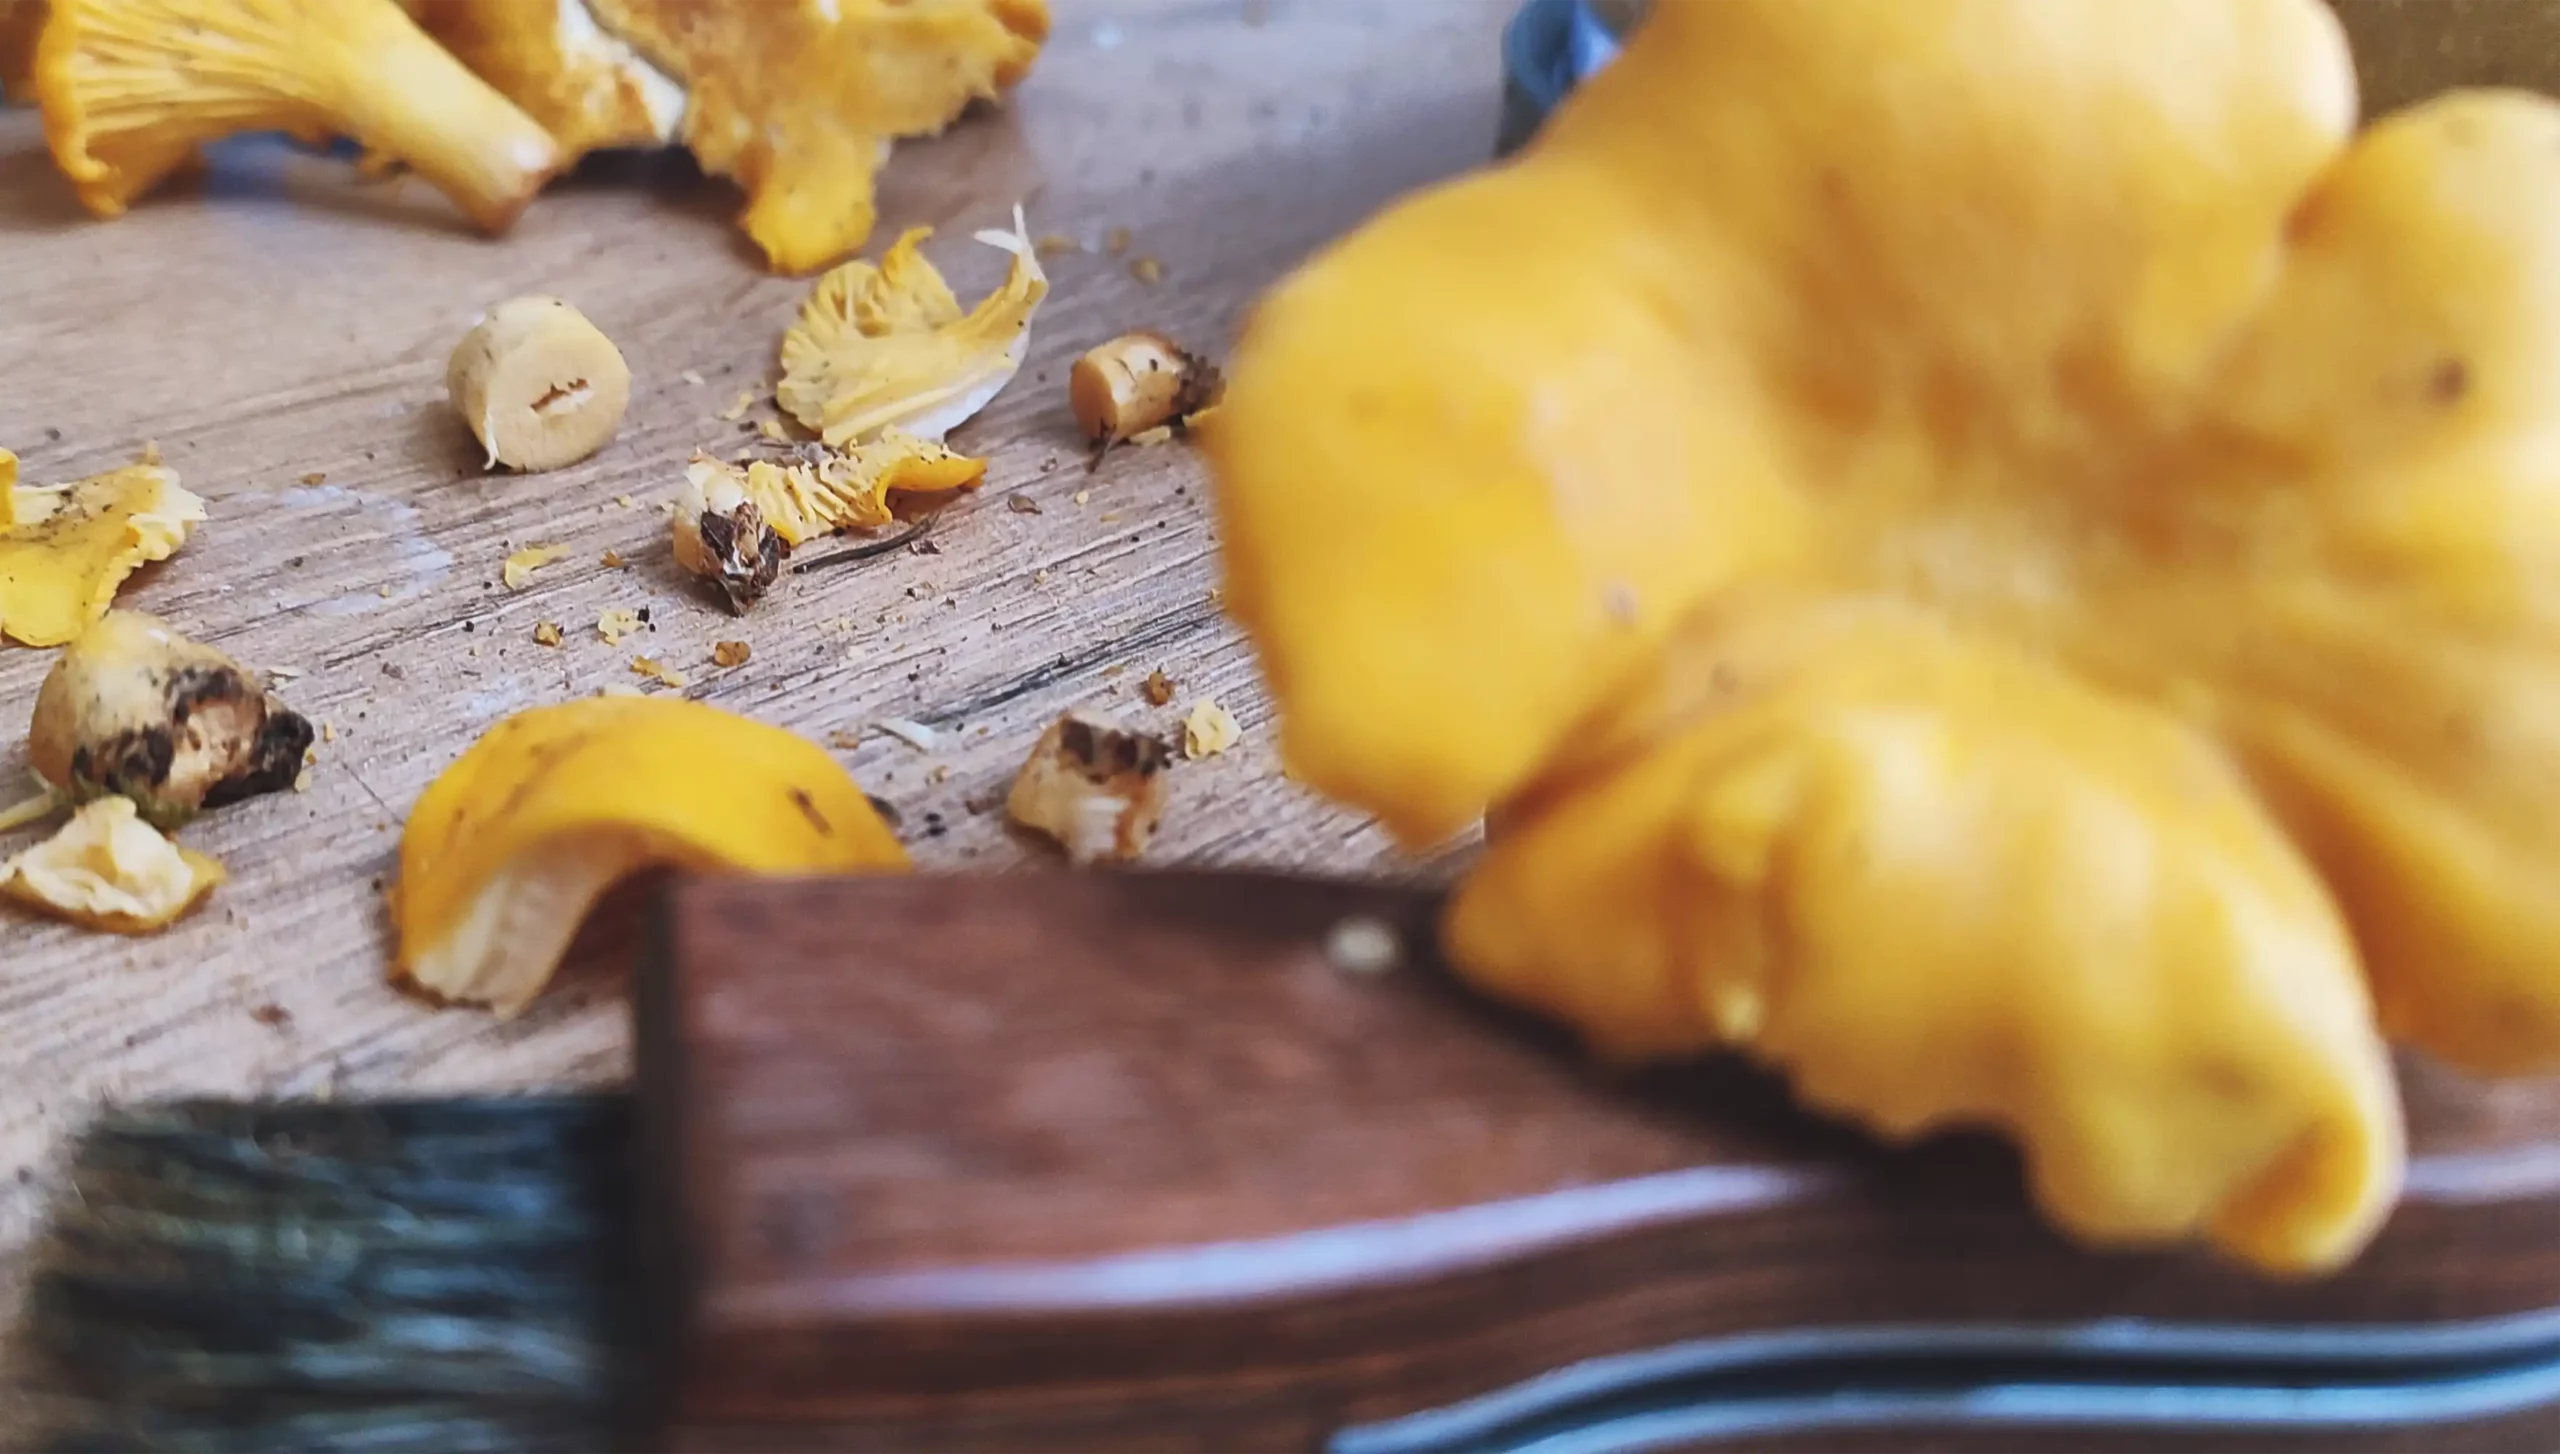 How to Clean Chanterelles